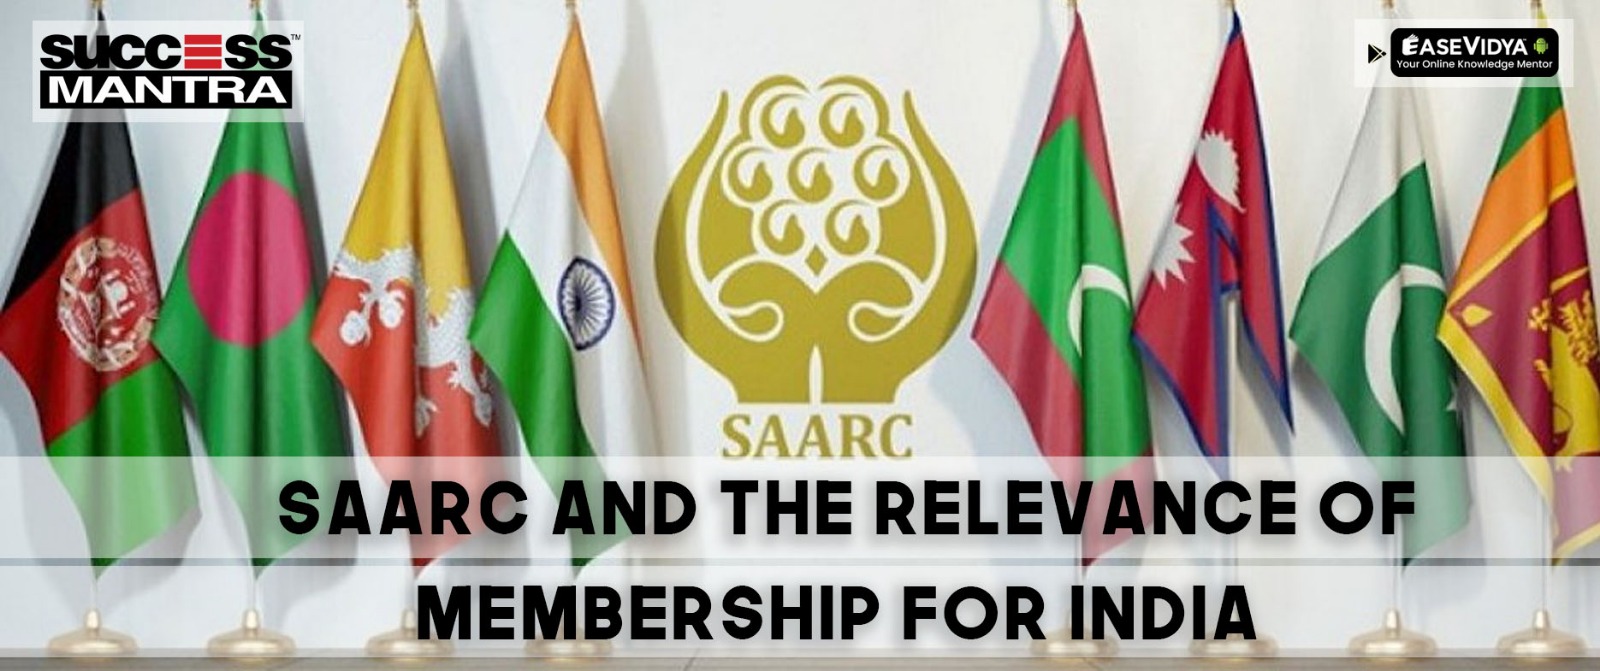 SAARC and the Relevance of Membership for India, SAARC